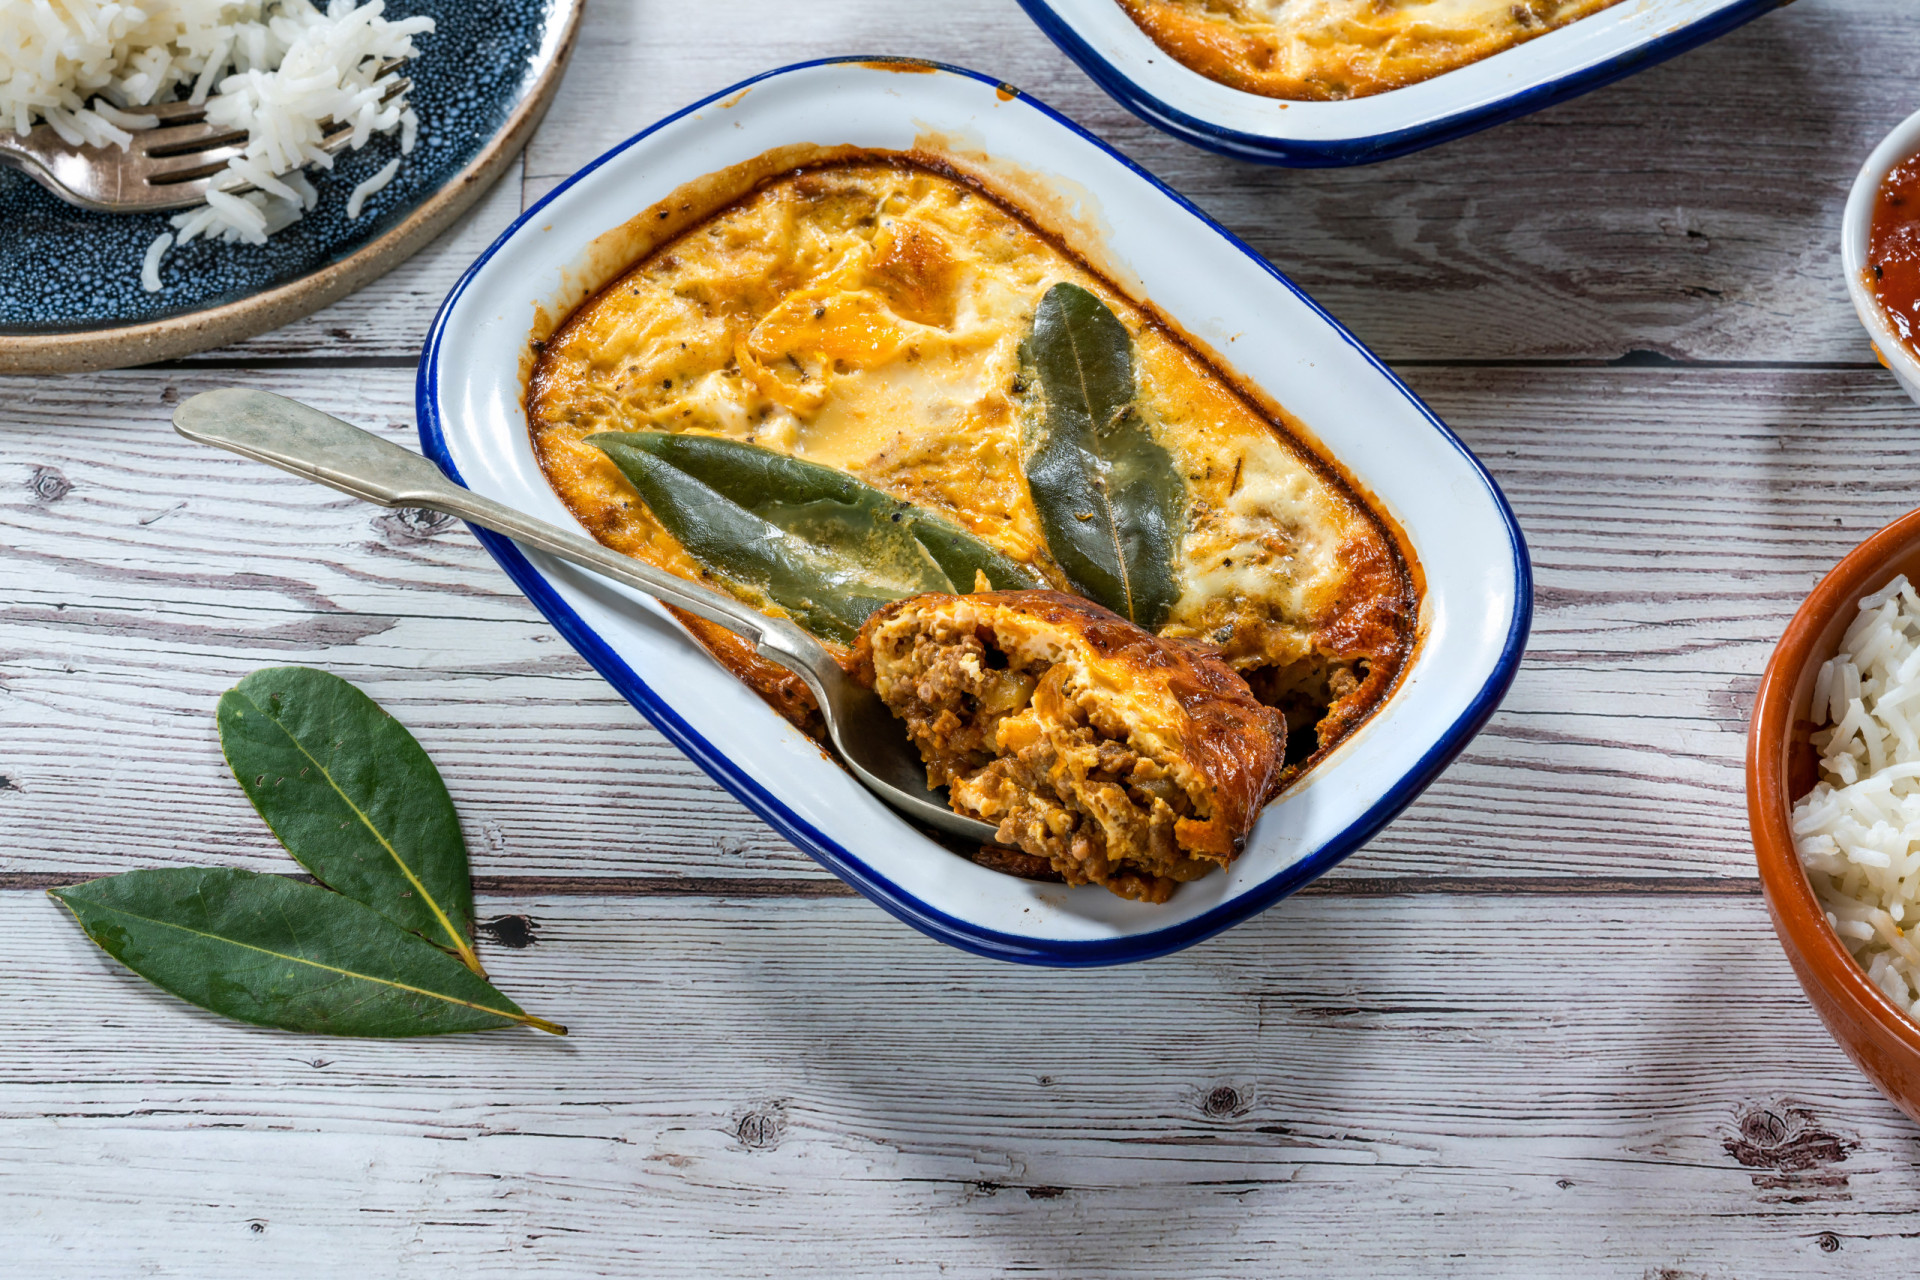 <p>Bobotie is a South African dish made from spiced minced meat, topped with a creamy egg-based layer, and often served with rice or chutney.</p><p>You may also like:<a href="https://www.starsinsider.com/n/451404?utm_source=msn.com&utm_medium=display&utm_campaign=referral_description&utm_content=707039en-us"> The best (and worst) celebrity Halloween costumes</a></p>